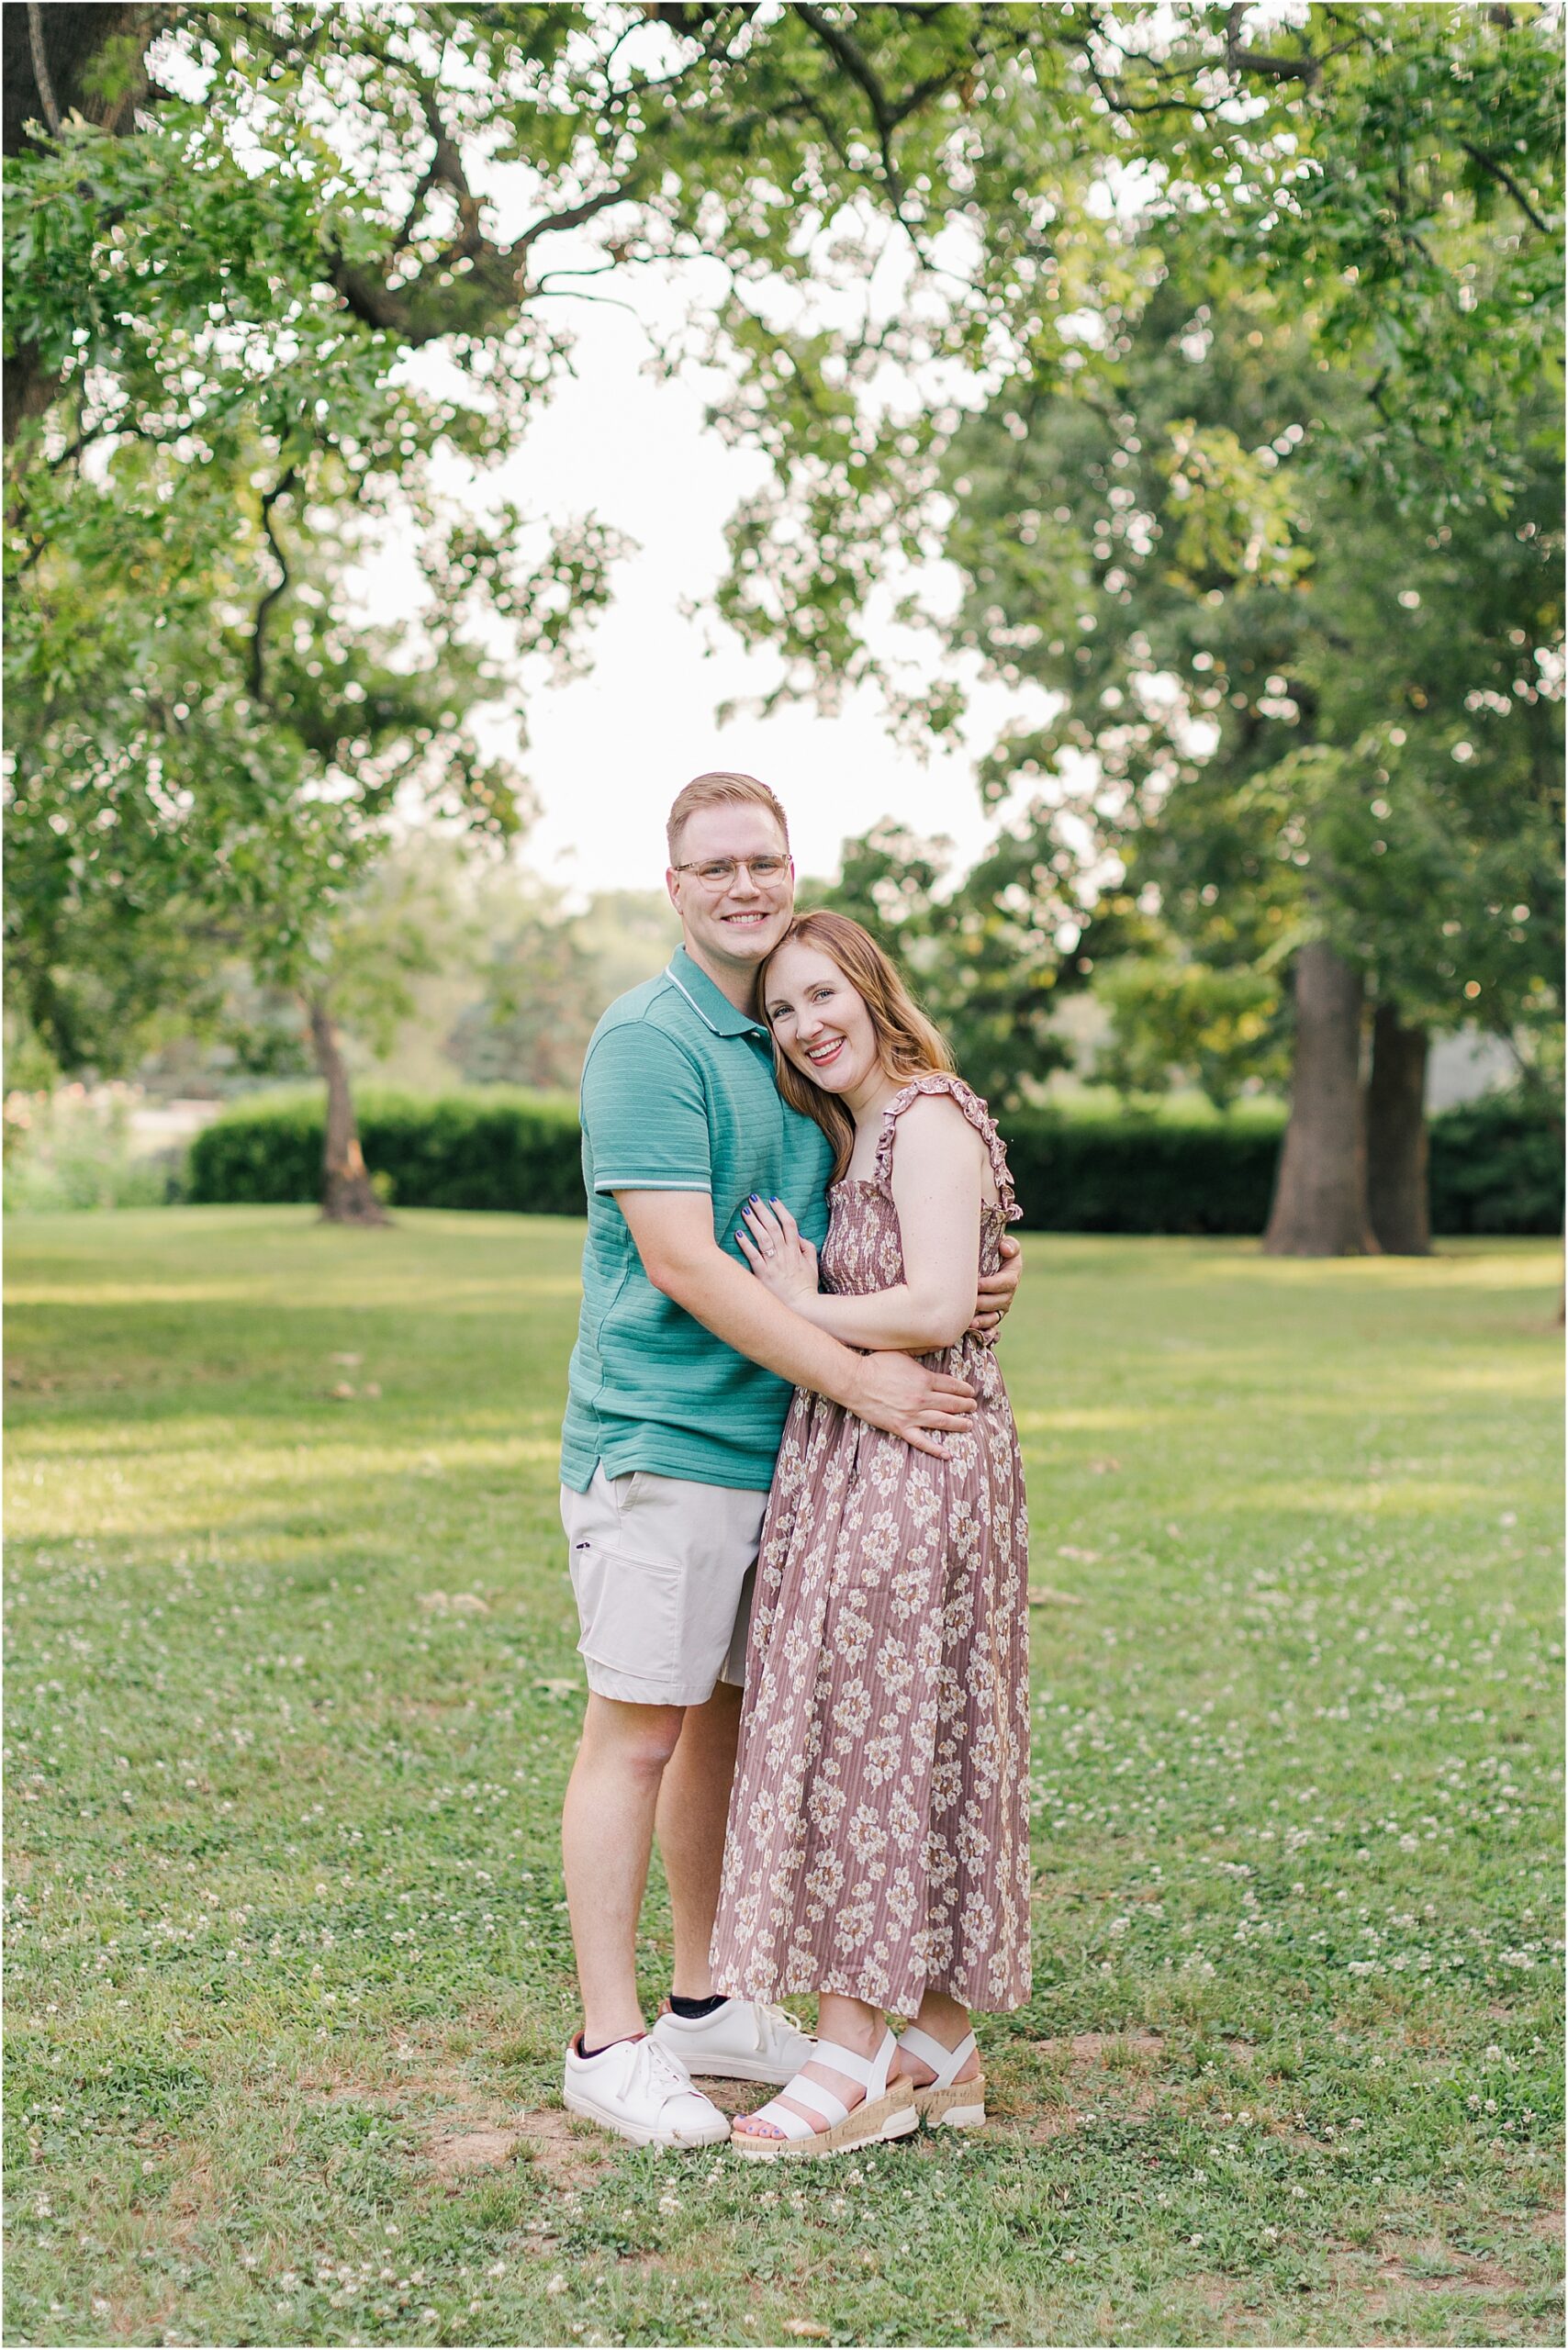 Mitchell and Alanna at woodward park at their summer family photo session.